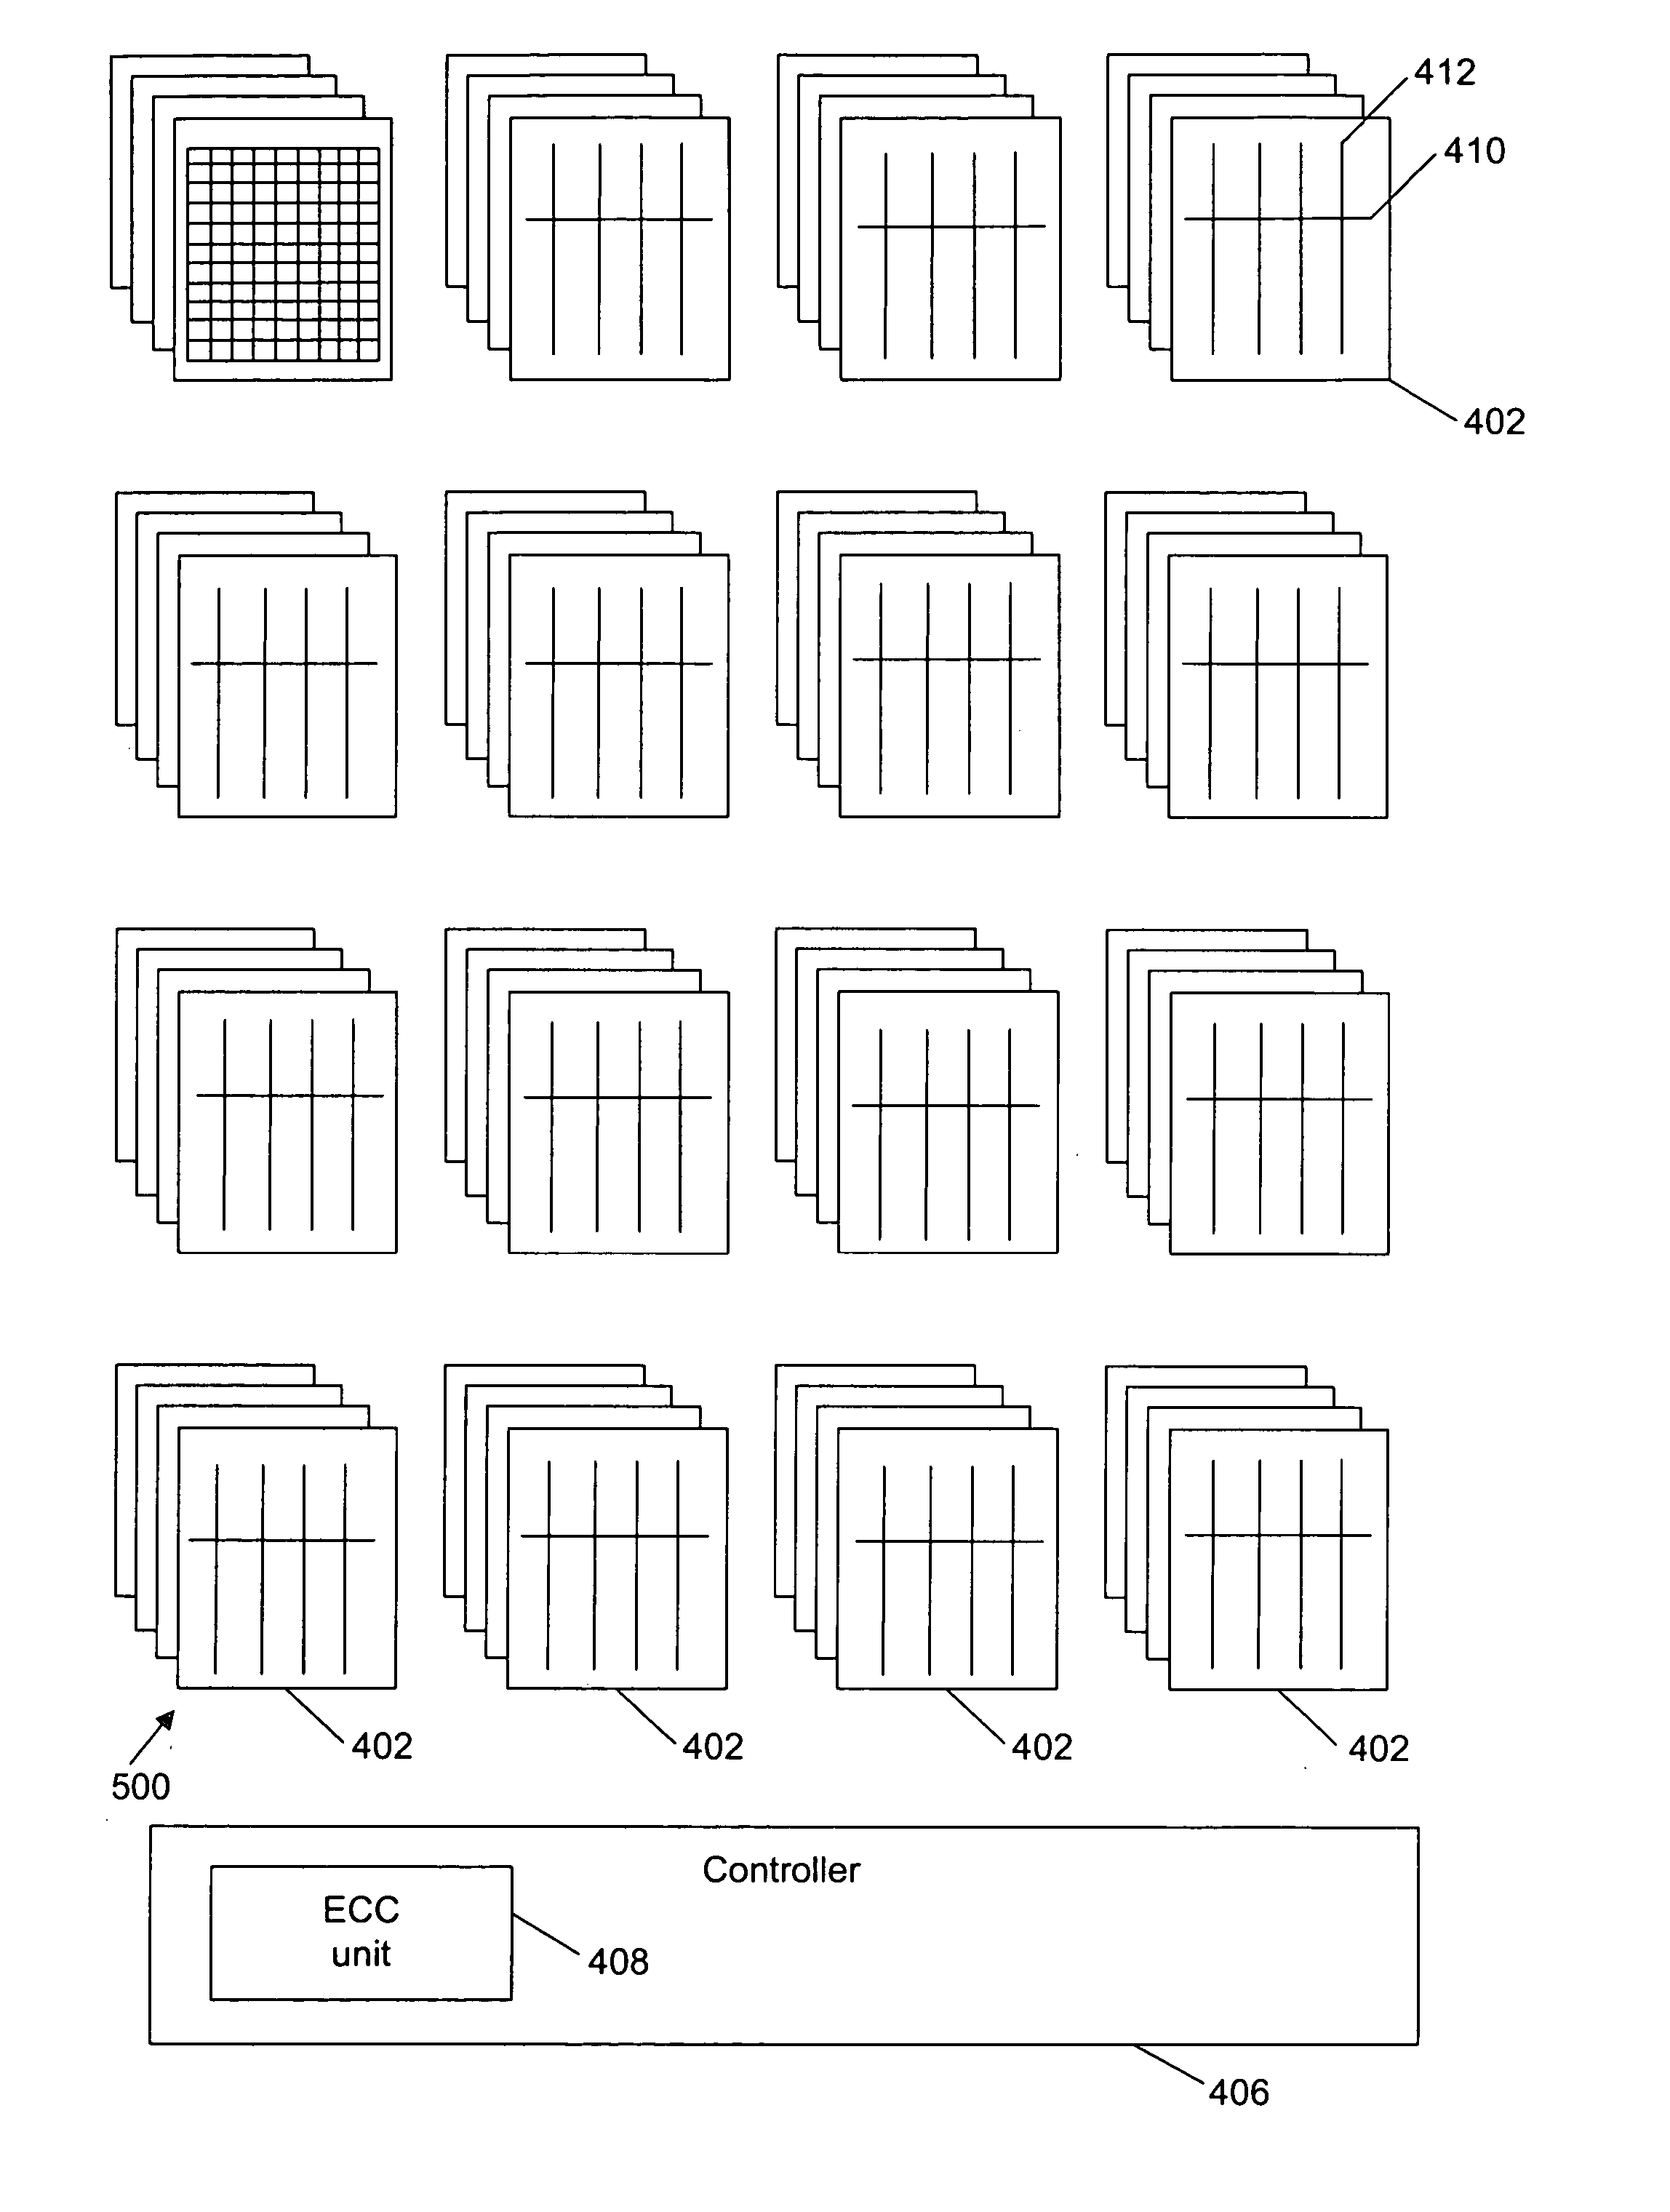 System and method for configuring a solid-state storage device with error correction coding